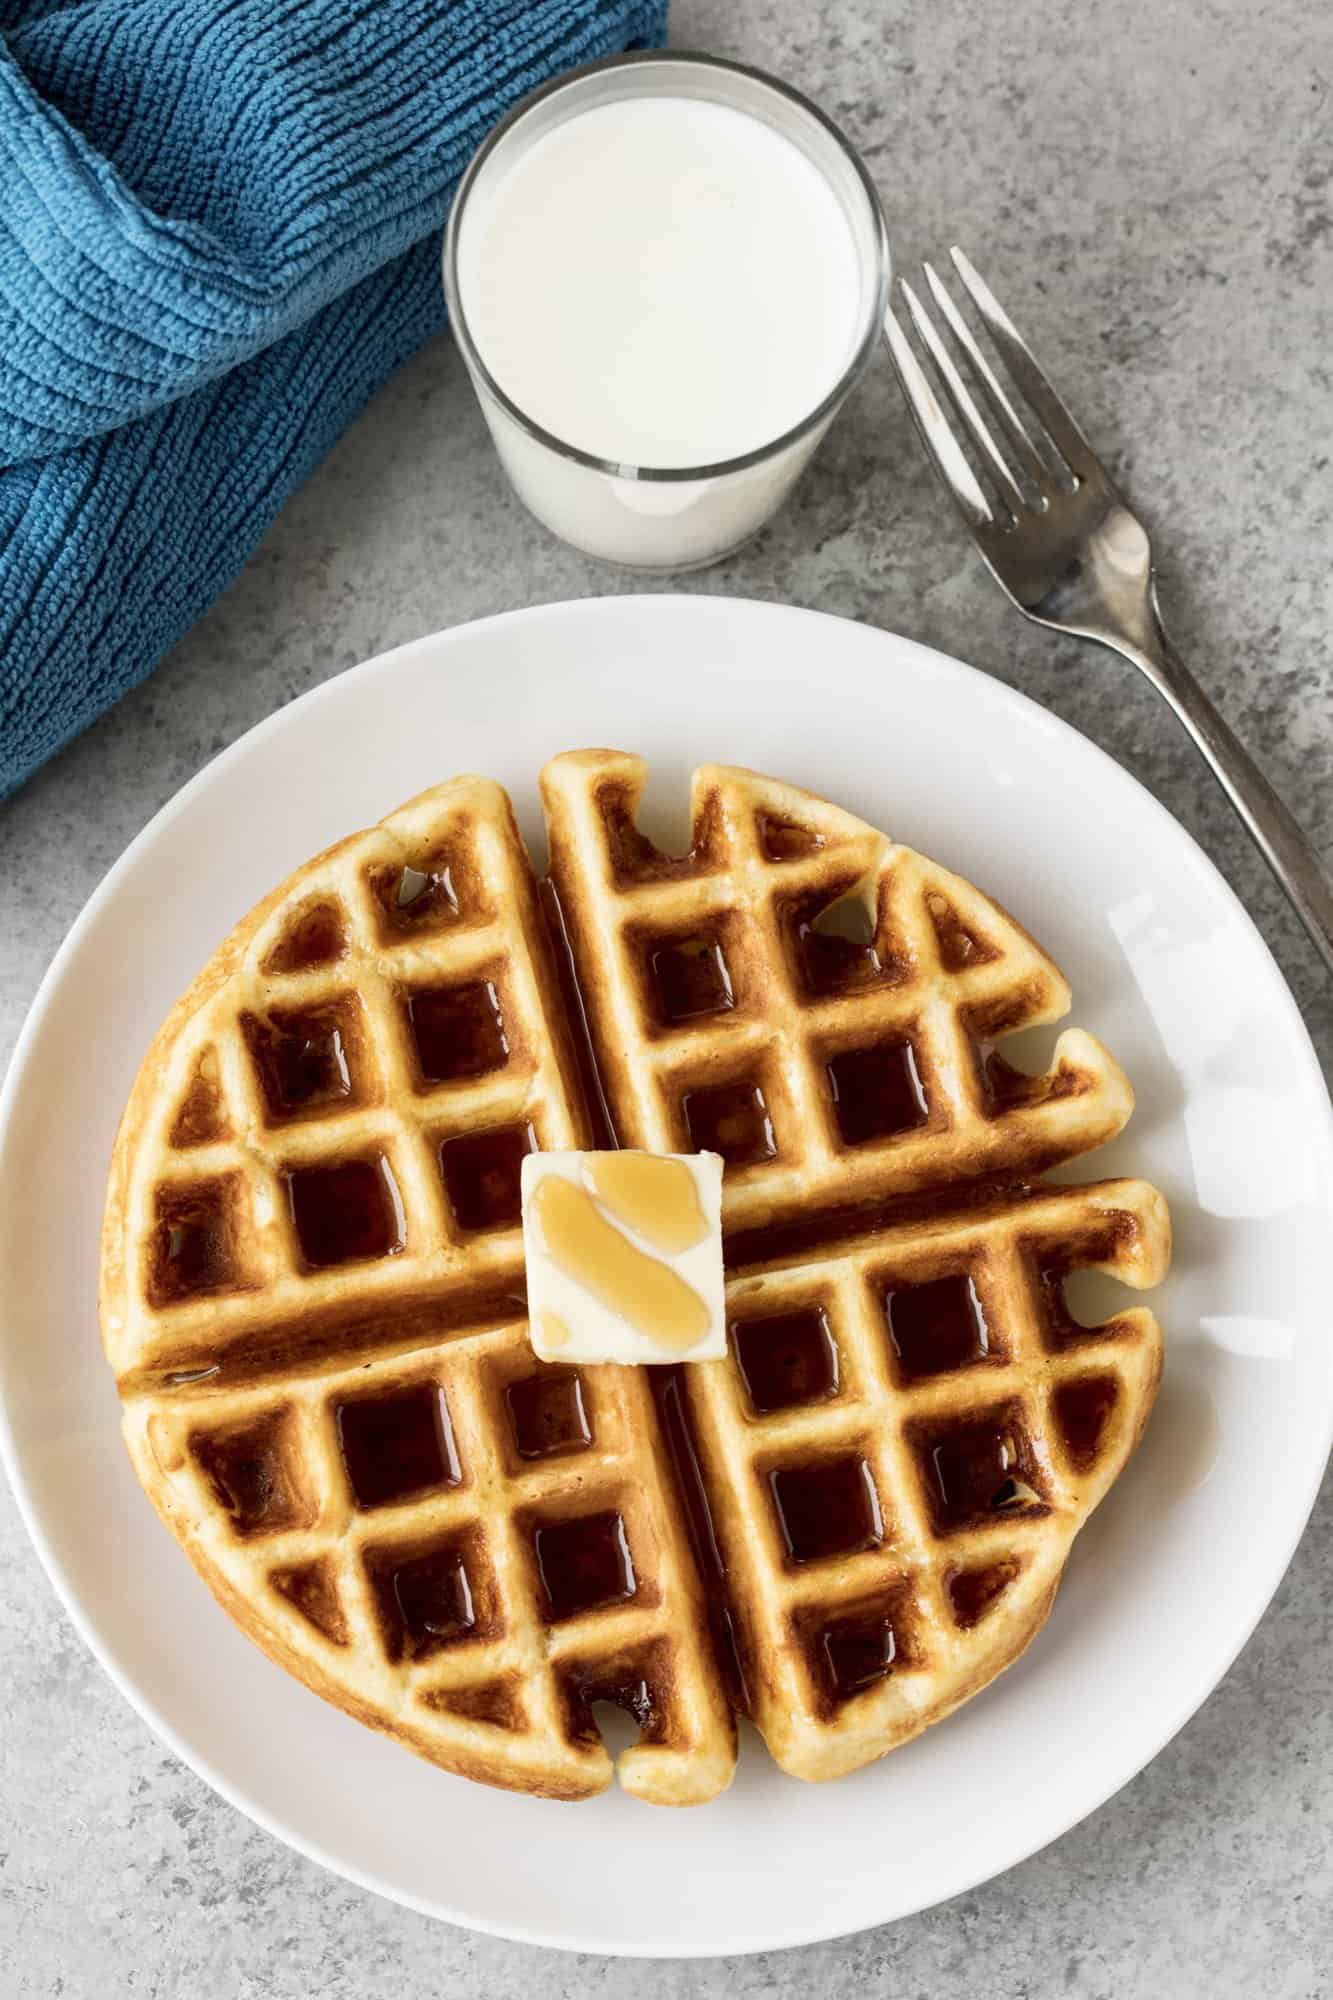 Greek Yogurt Waffles add some protein and greek yogurt goodness to your morning waffle routine. Give your waffles a healthy touch with this easy breakfast recipe.